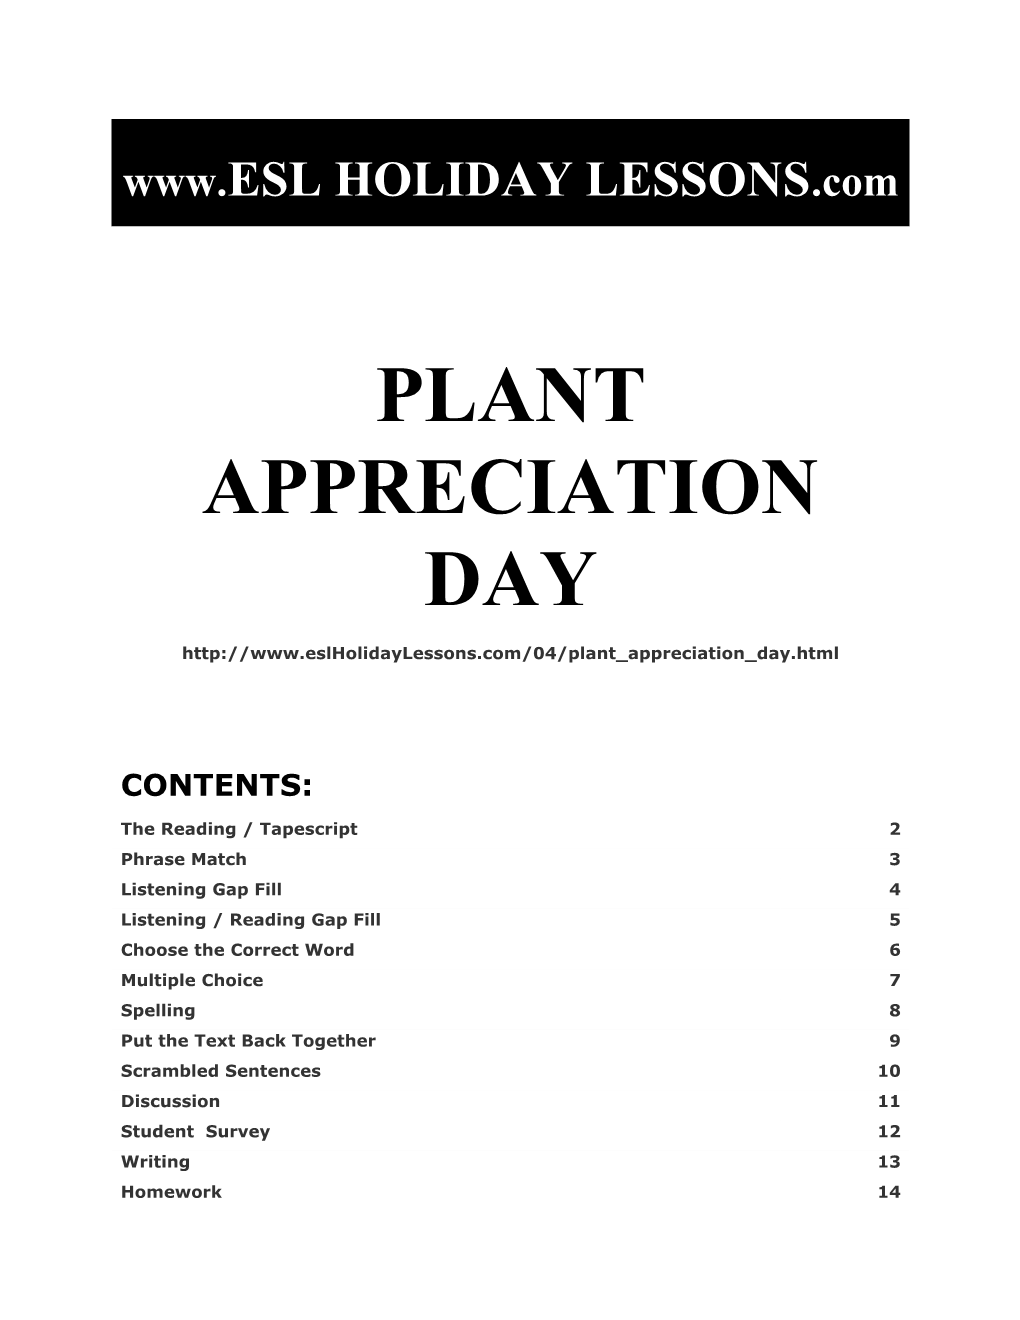 Holiday Lessons - Plant Appreciation Day